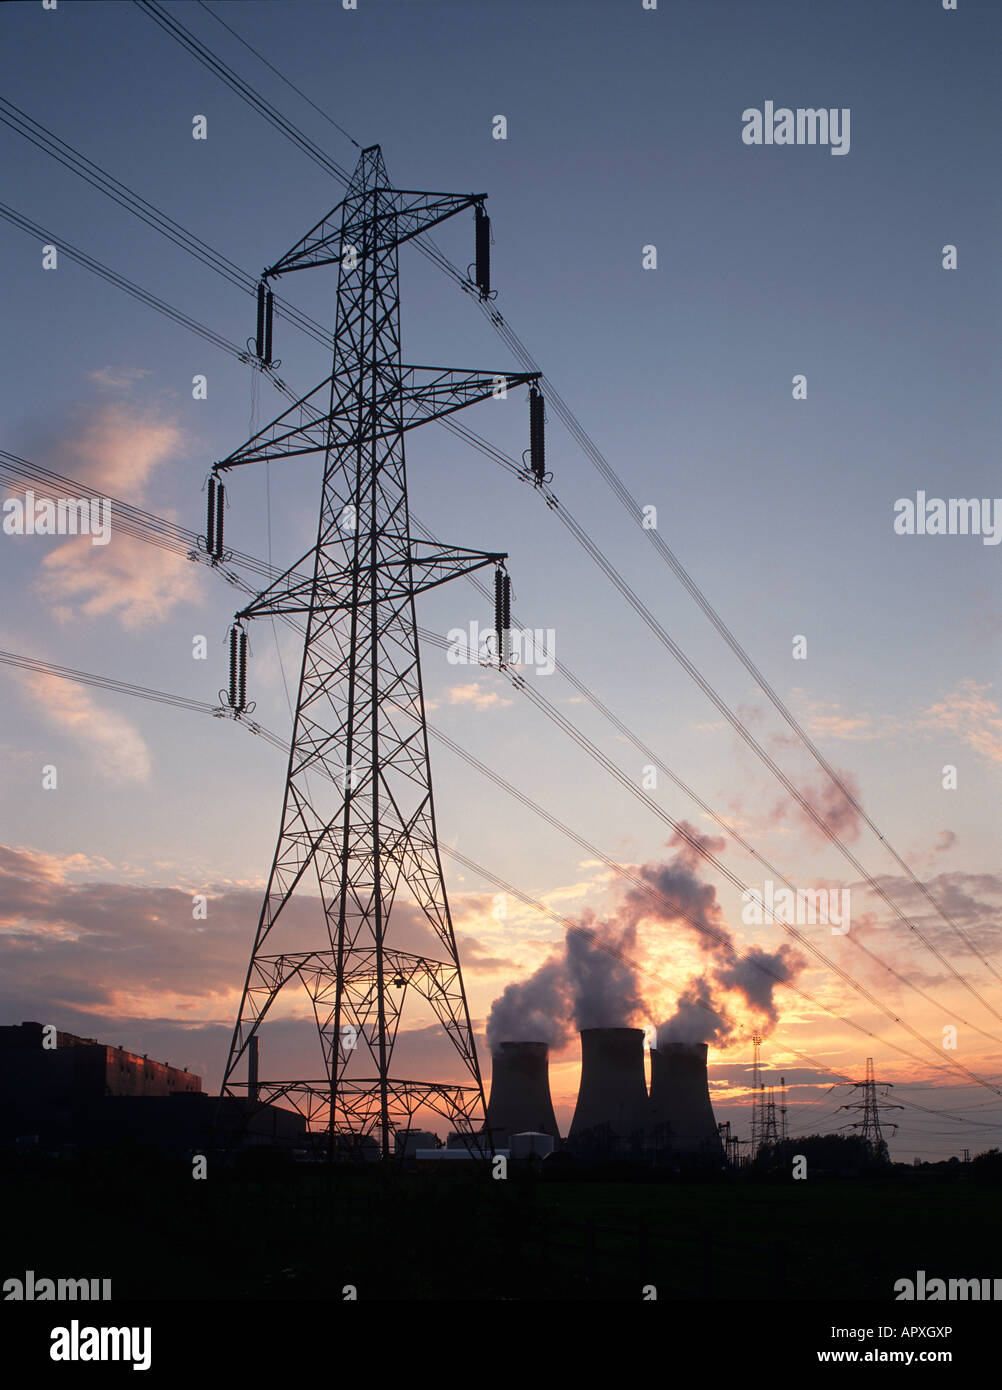 Coal Fired power station,Inghilterra Foto Stock